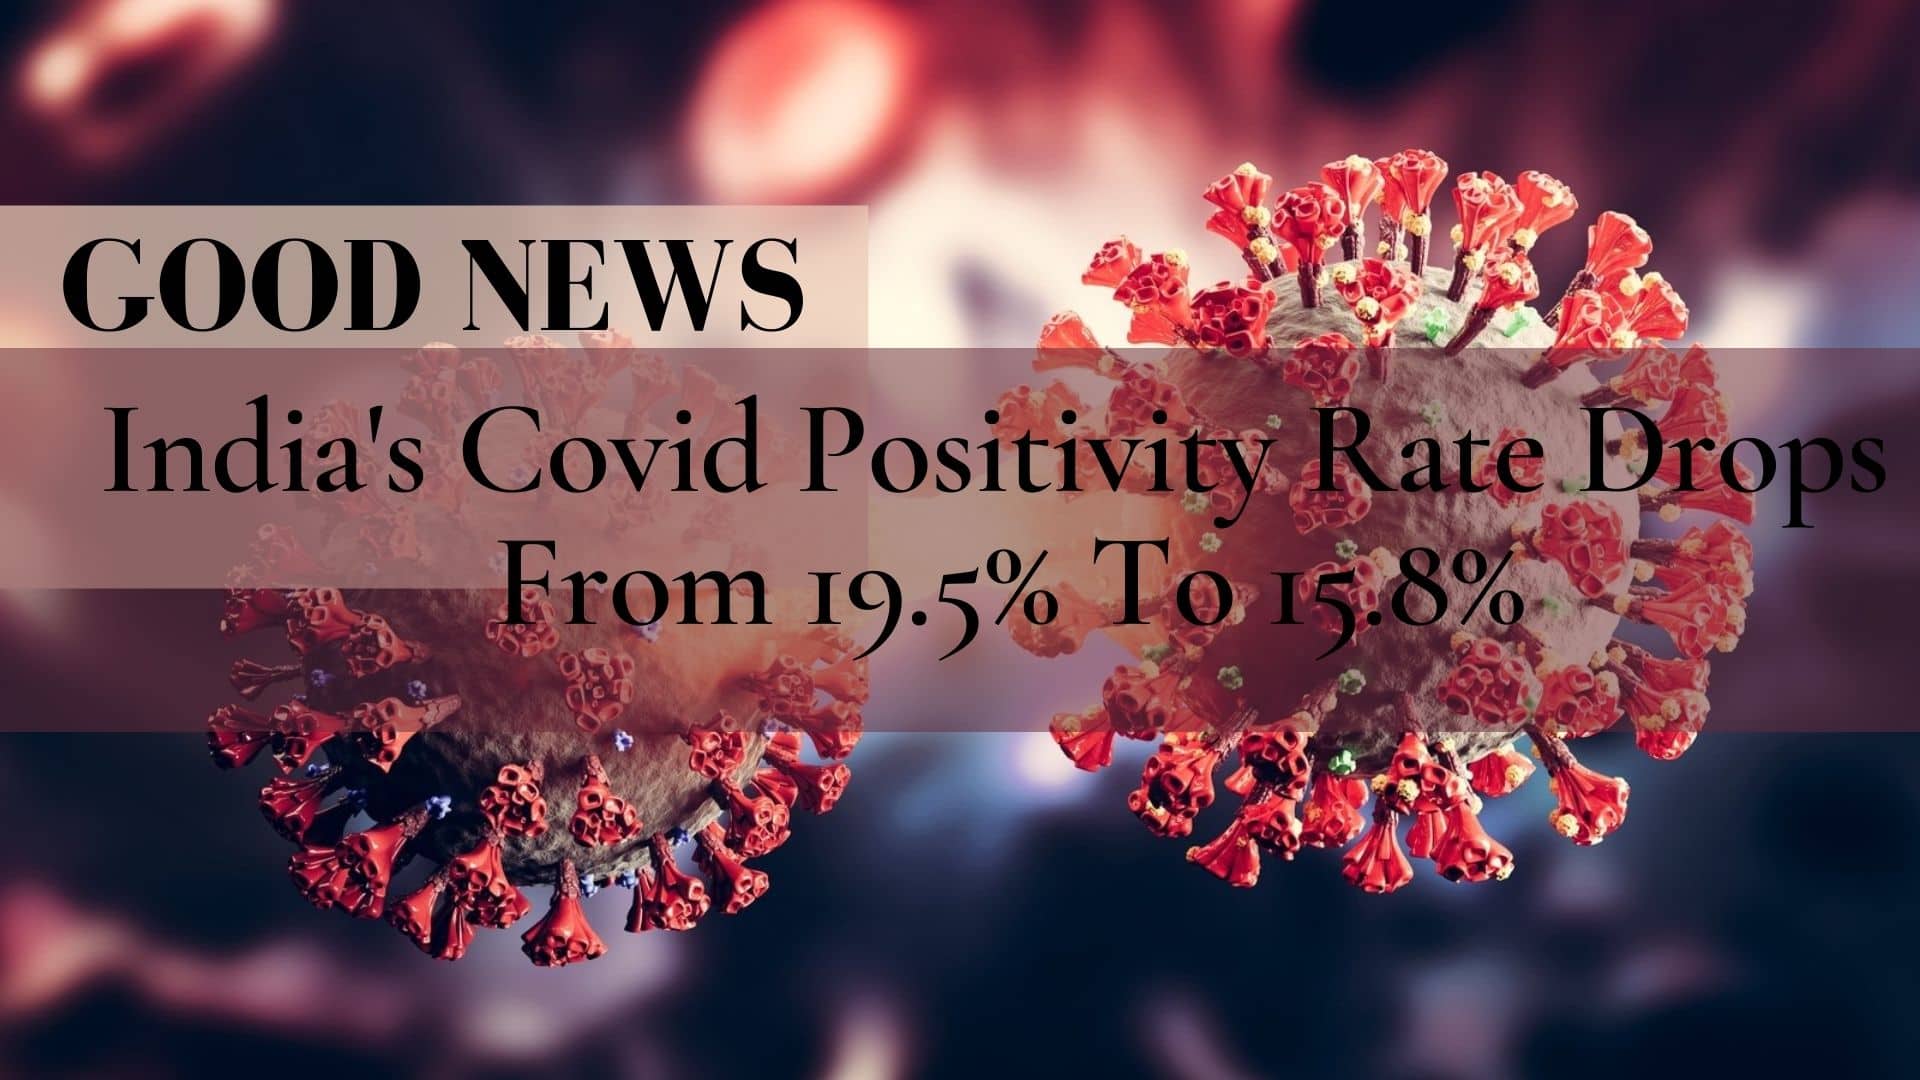 COVID-19 Live Updates: Good News, India's Covid Positivity Rate Drops From 19.5% To 15.8%; Country Logs 2.51L New Cases